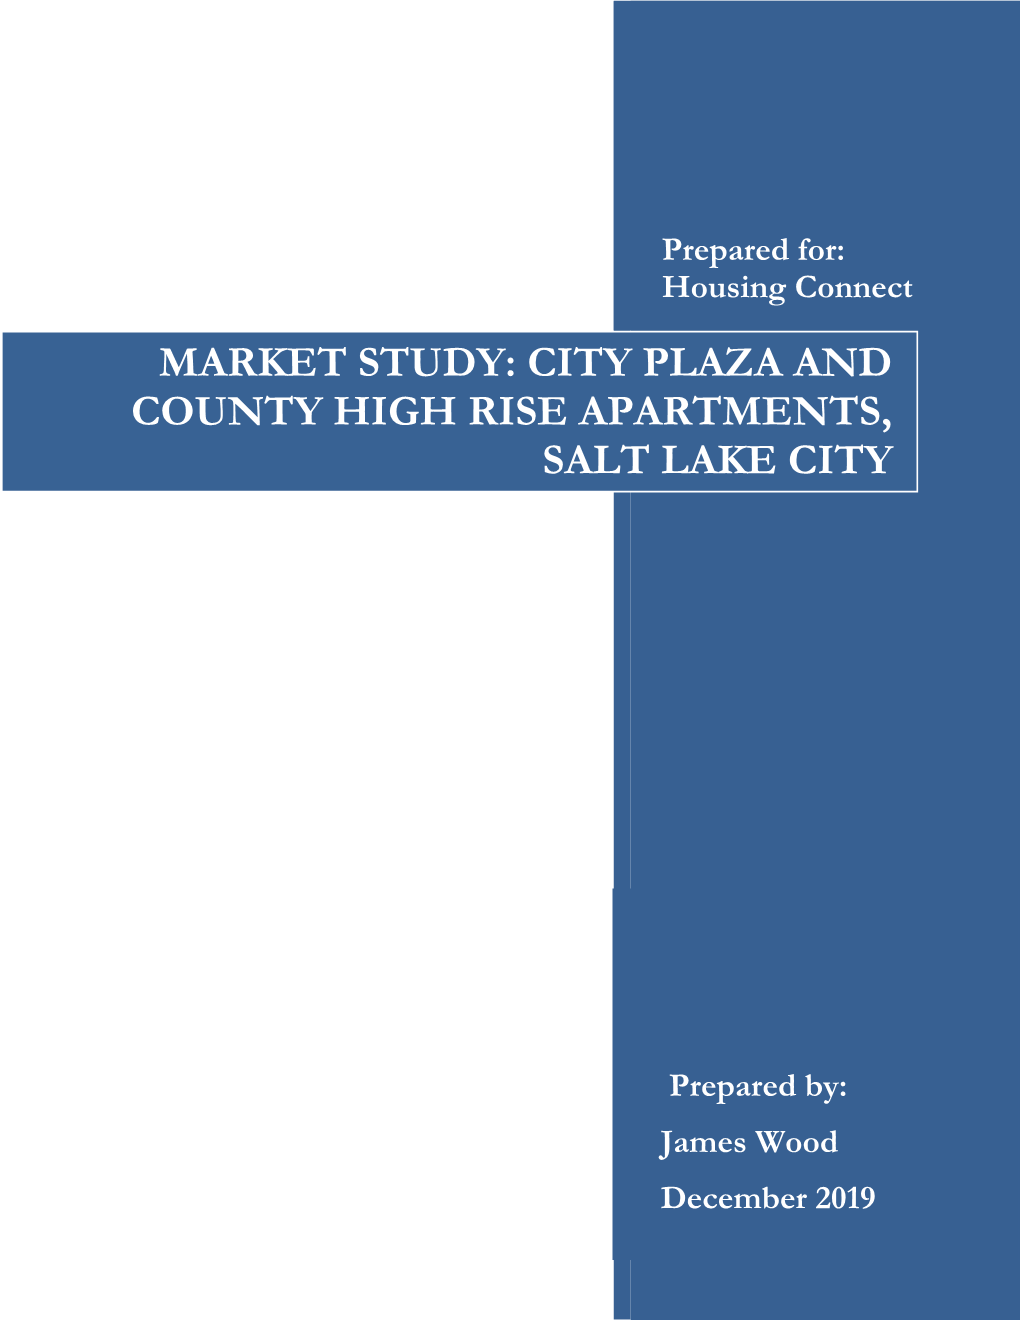 Market Study: City Plaza and County High Rise